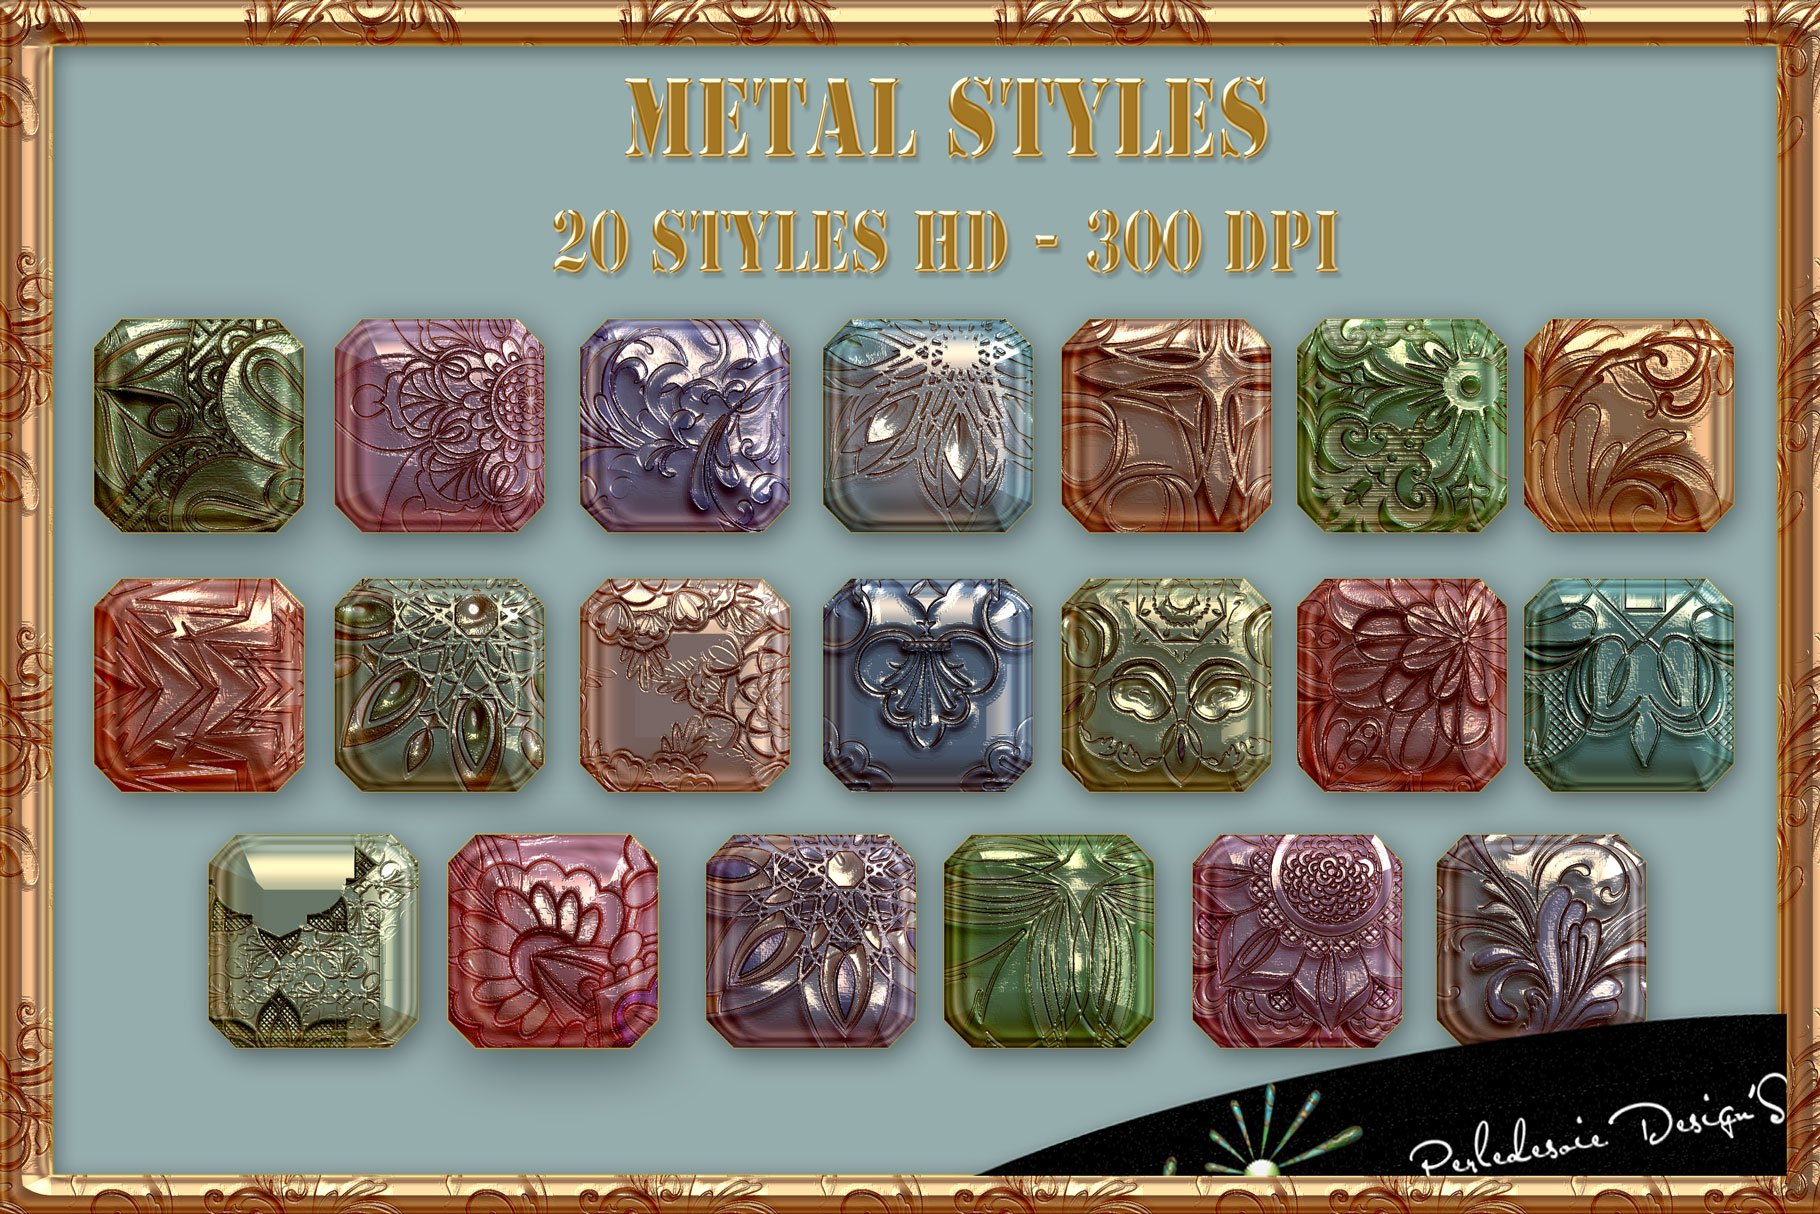 Metal Stylescover image.